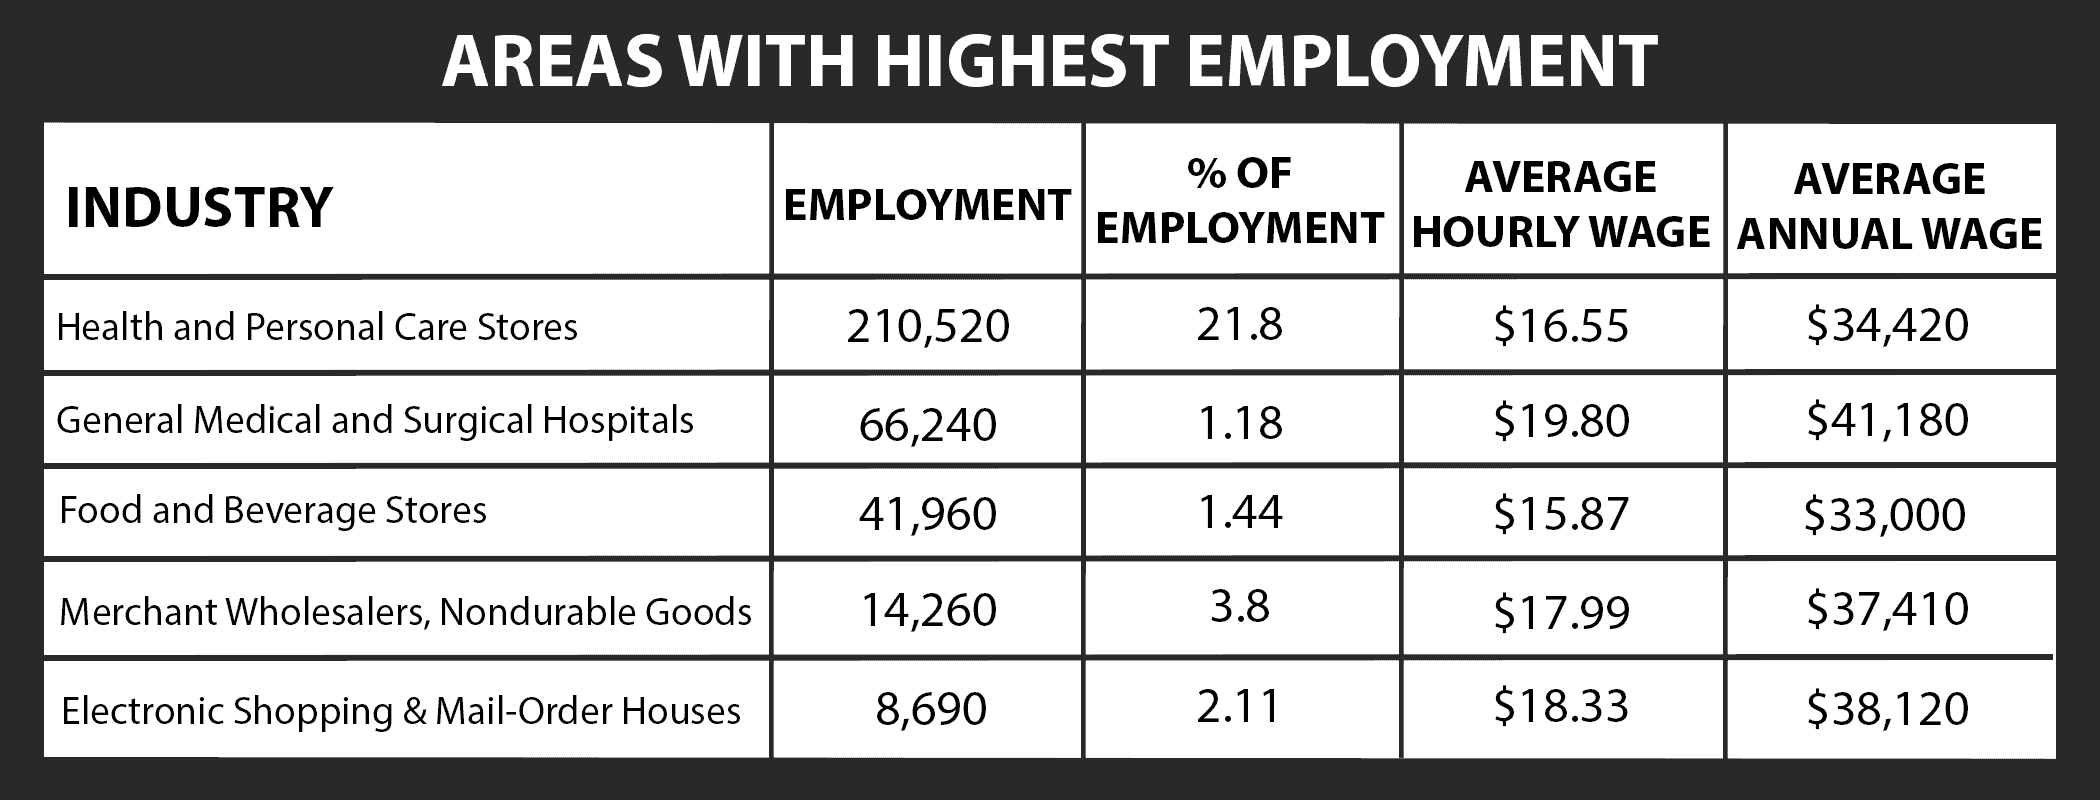 Areas With Highest Employment